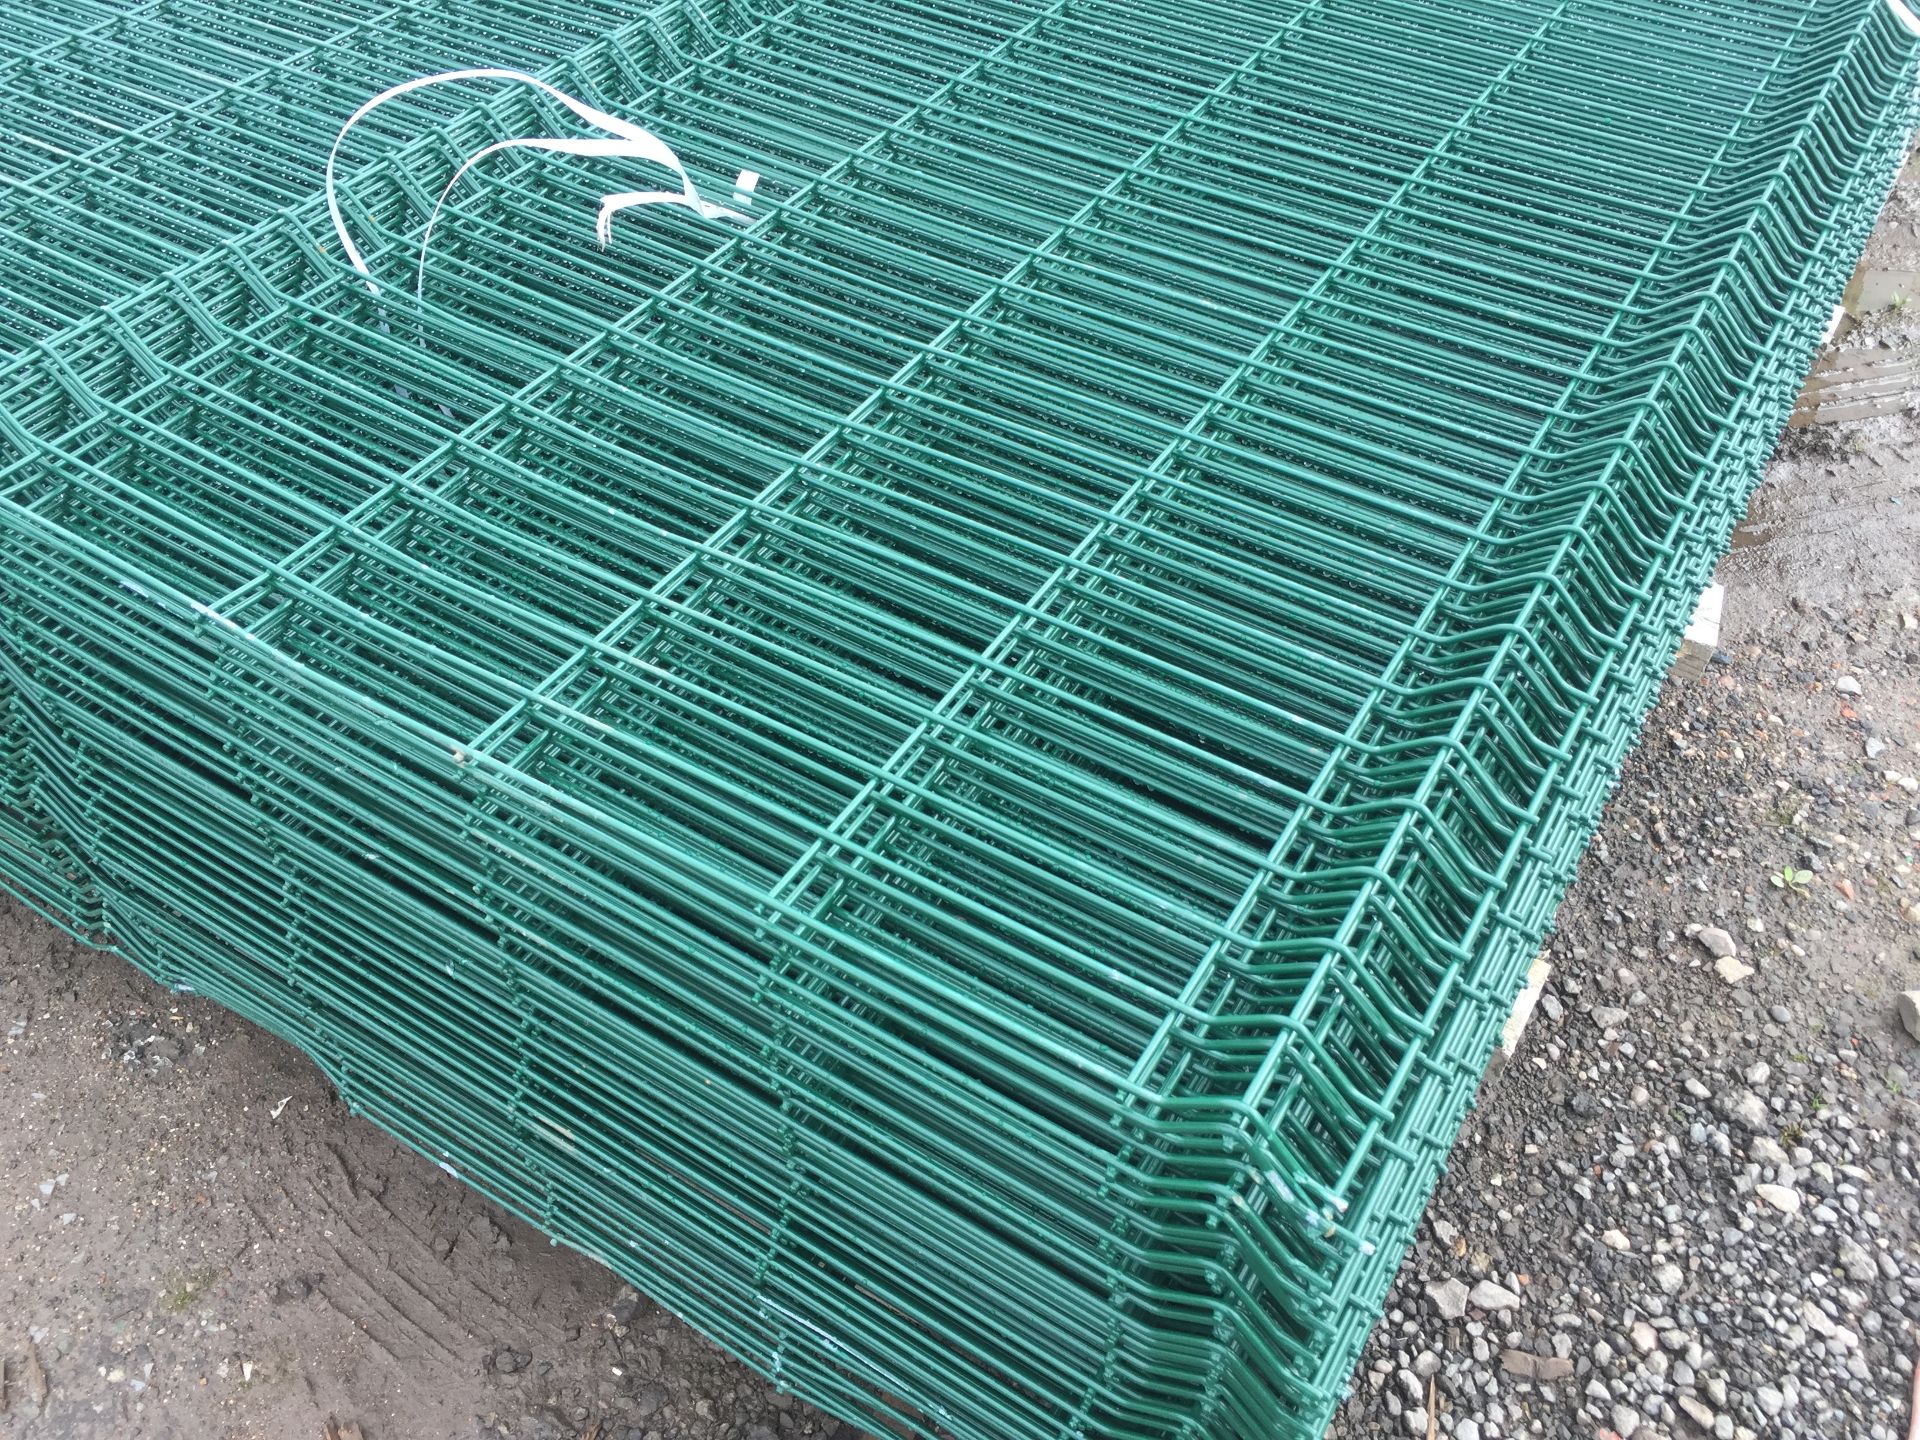 50 x Brand New Green Mesh Fence Panels 2000mm high x 3000mm long - Image 2 of 2